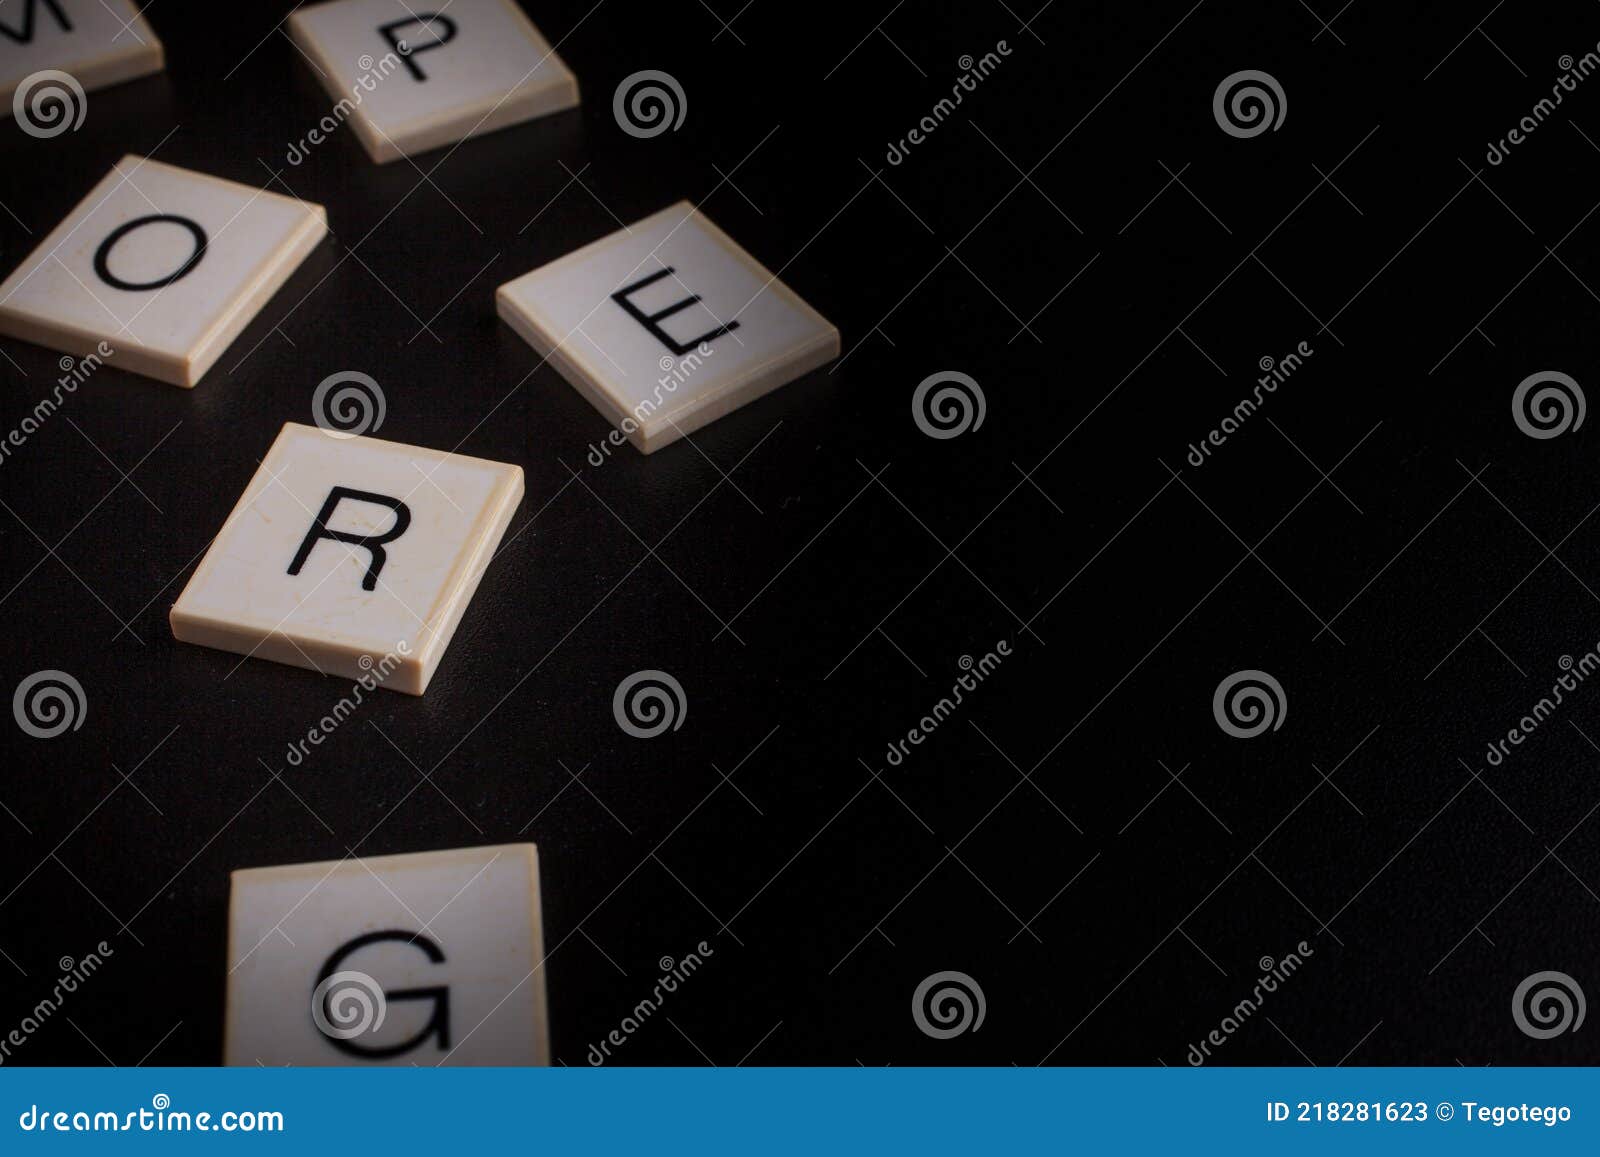 letters of the alphabet in random order on a black background